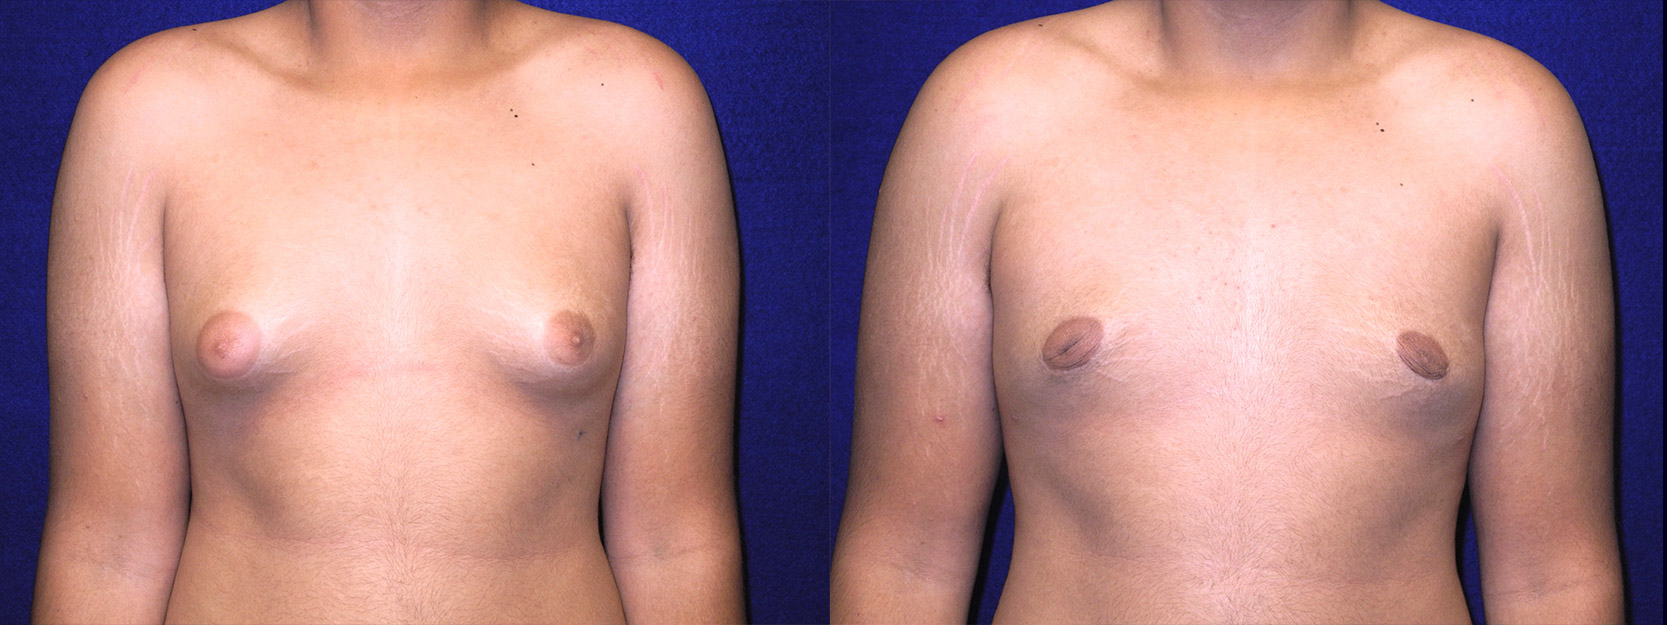 Frontal View - Male Breast Reduction